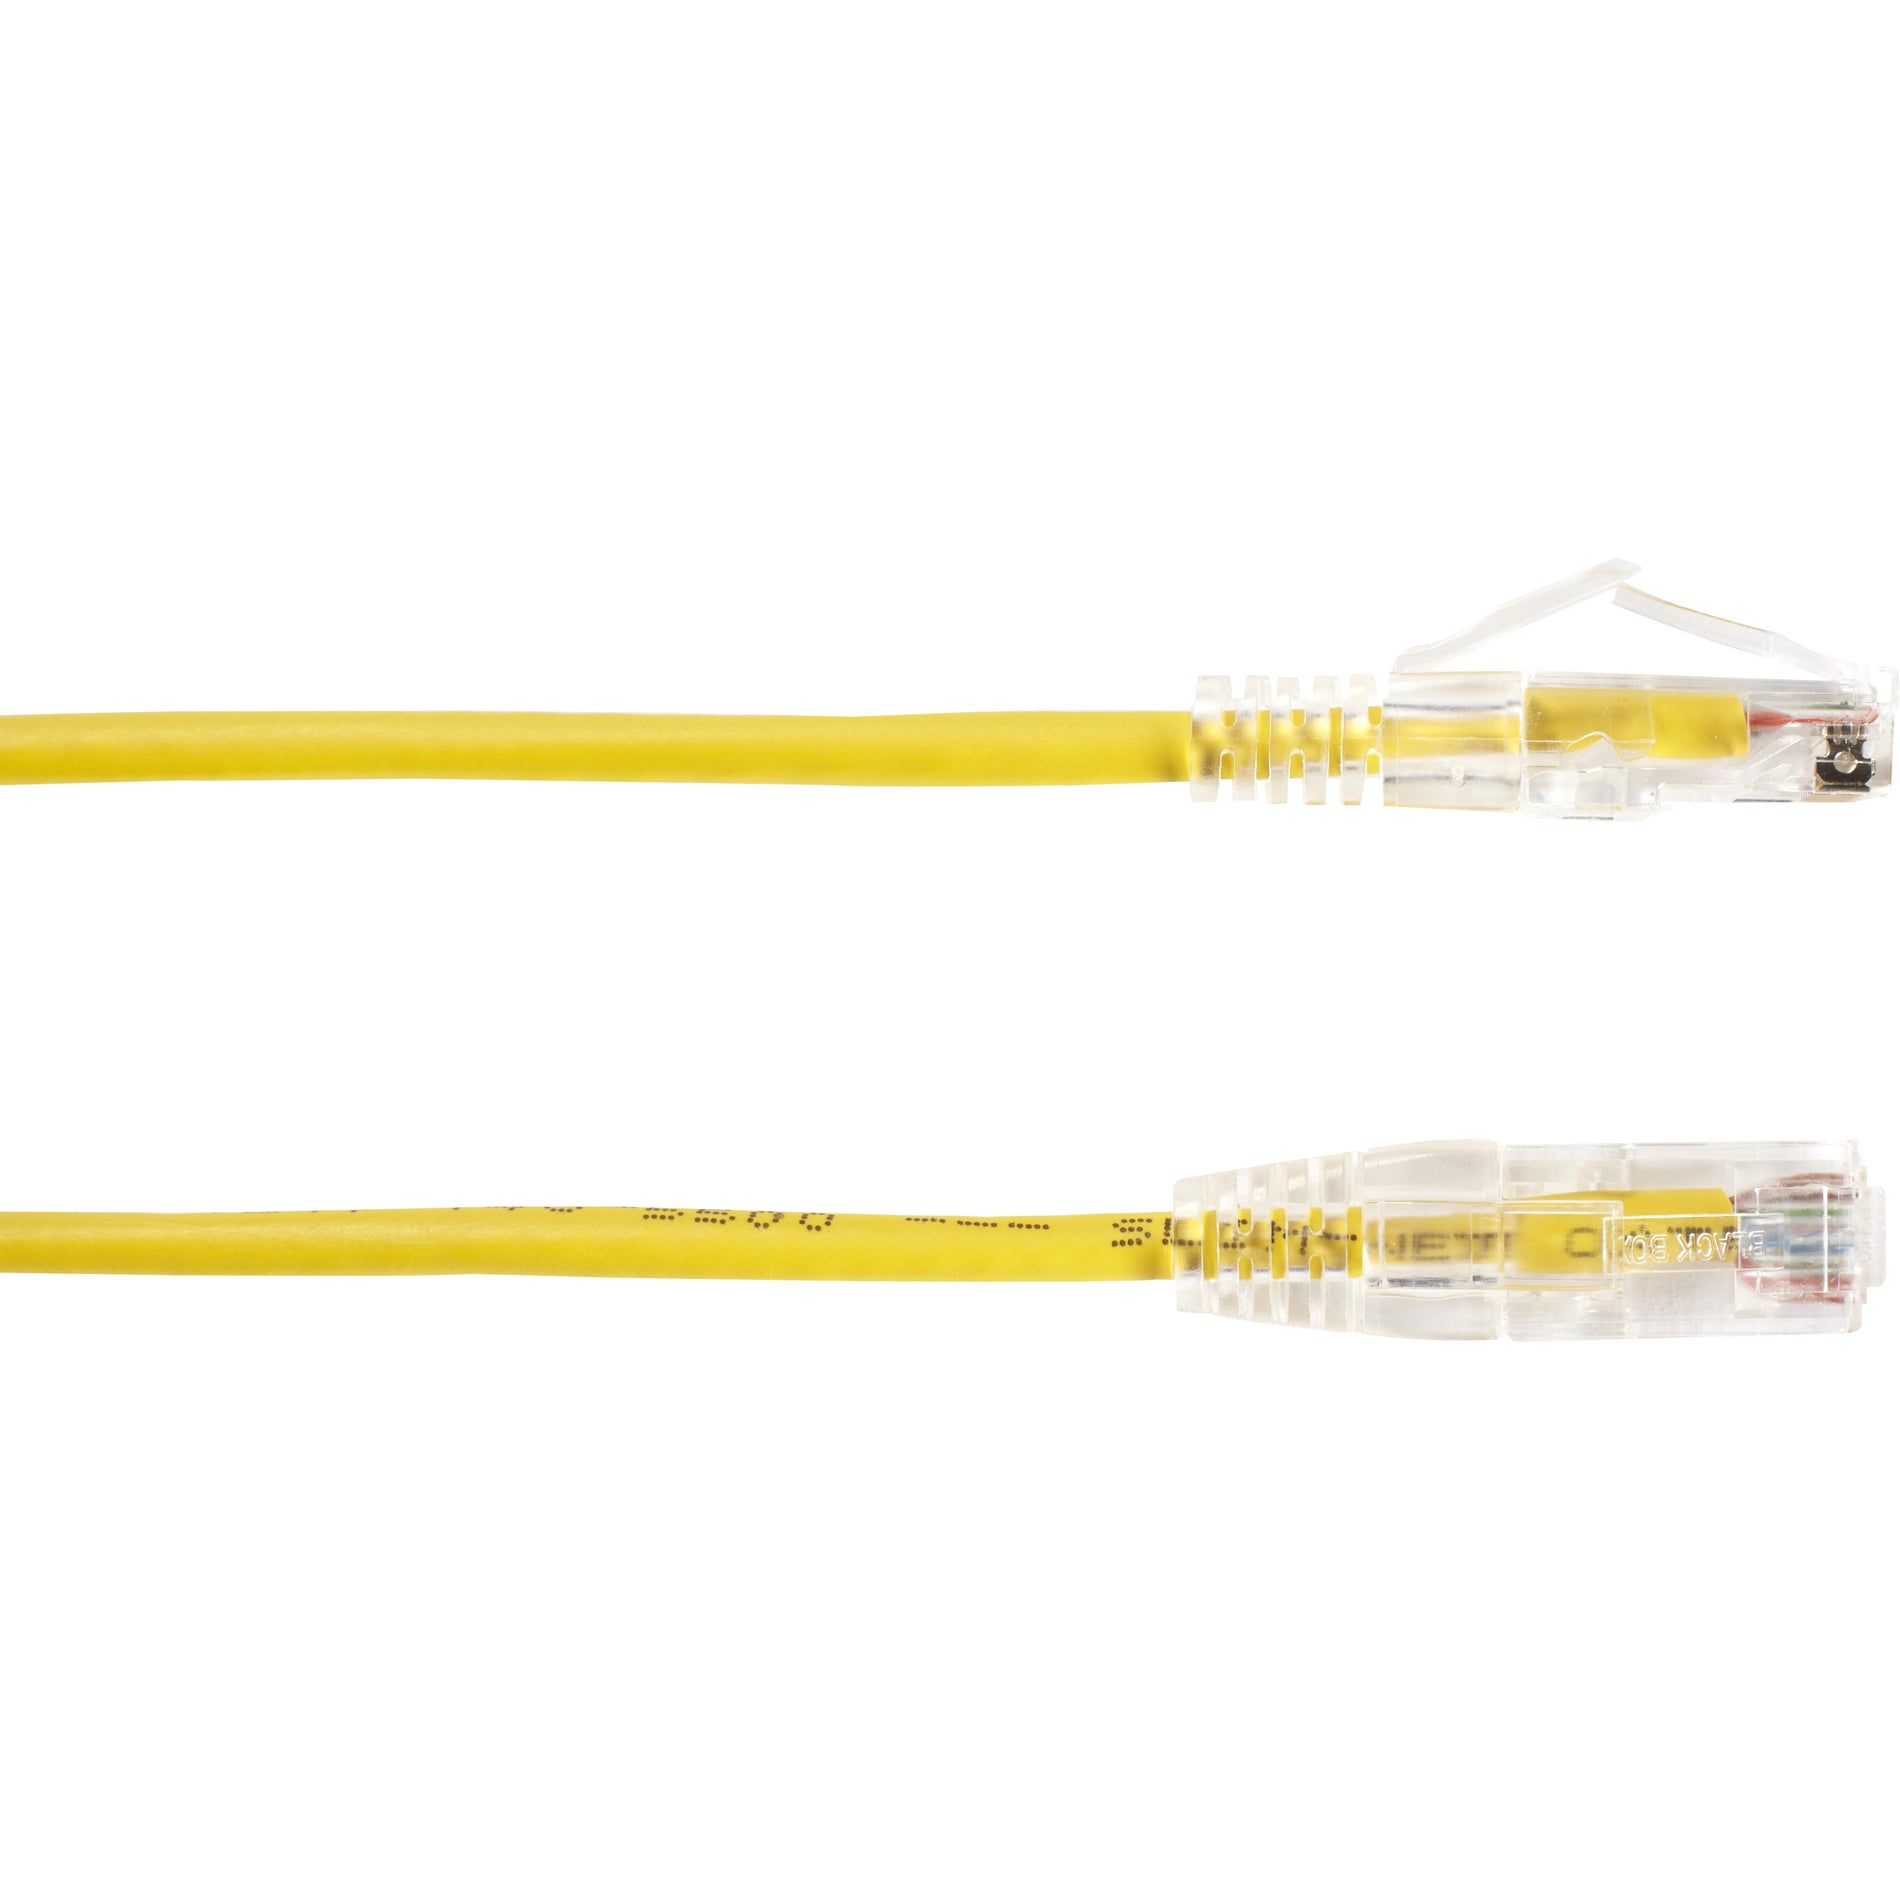 Black Box C6PC28-YL-04 Slim-Net Cat.6 UTP Patch Network Cable, 4 ft, 10 Gbit/s, Snagless Boot